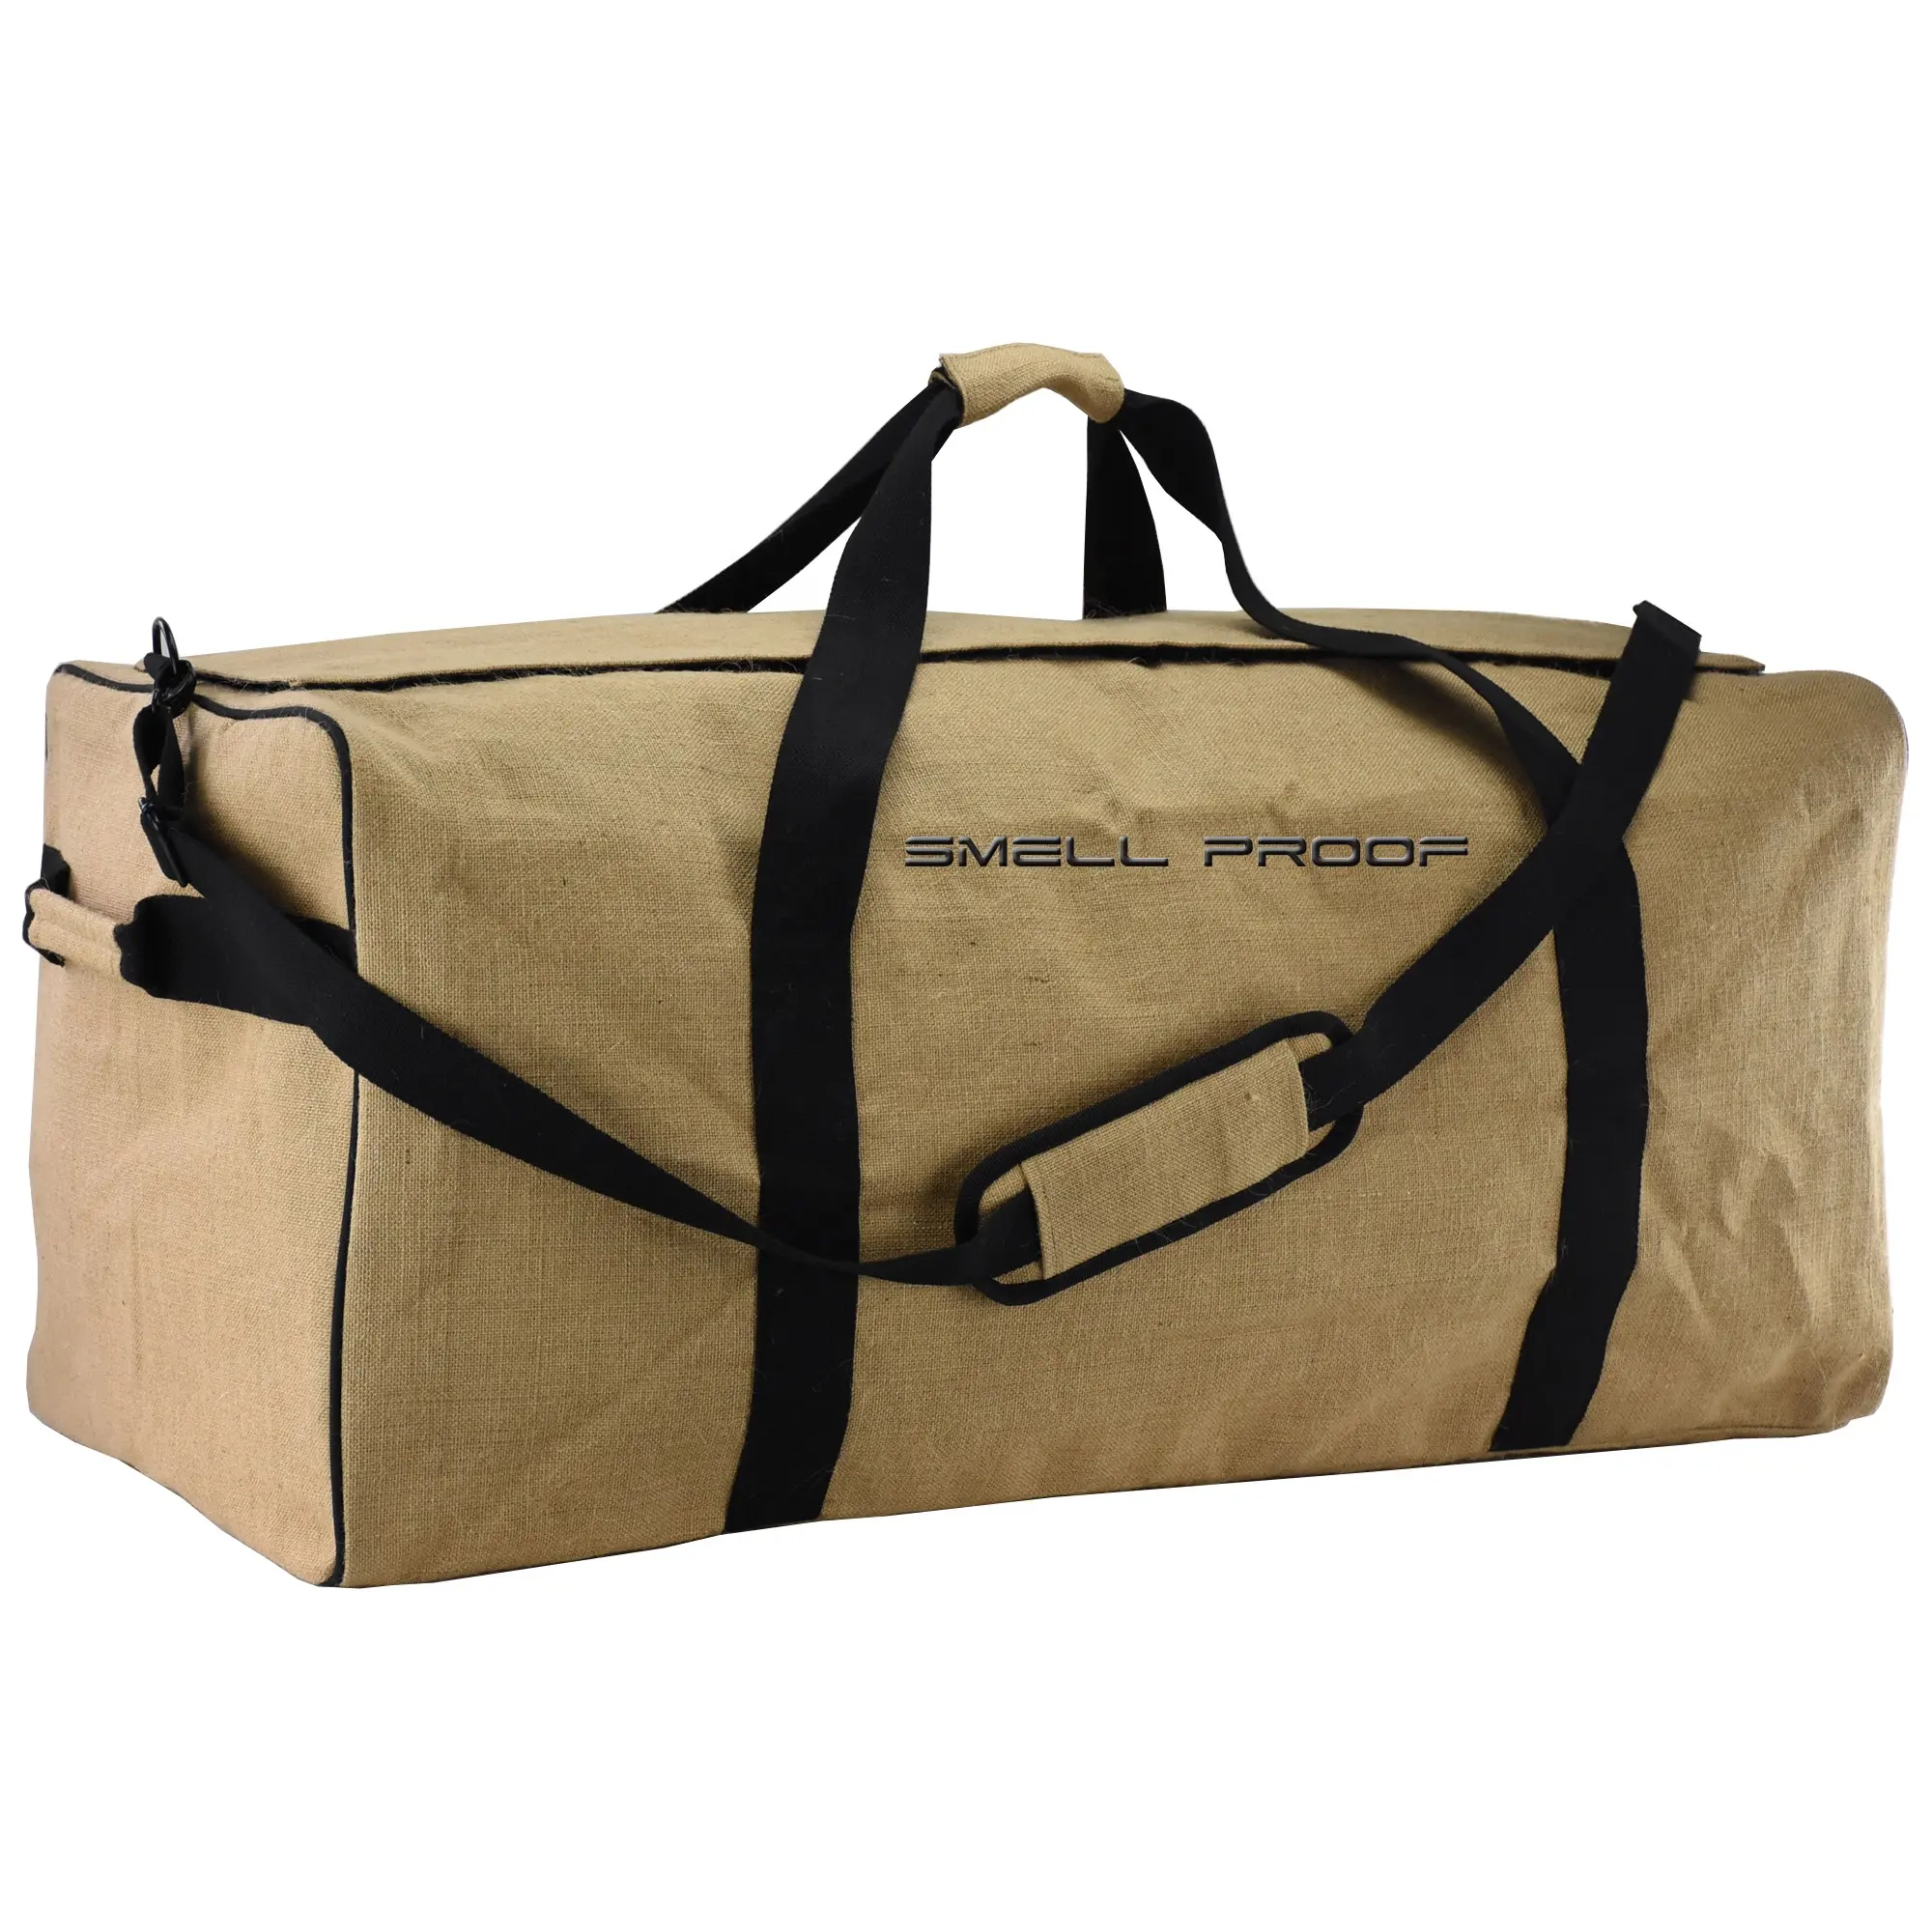 Xlarger anti-smell Jute hemp smell proof duffel bag with activated carbon lining